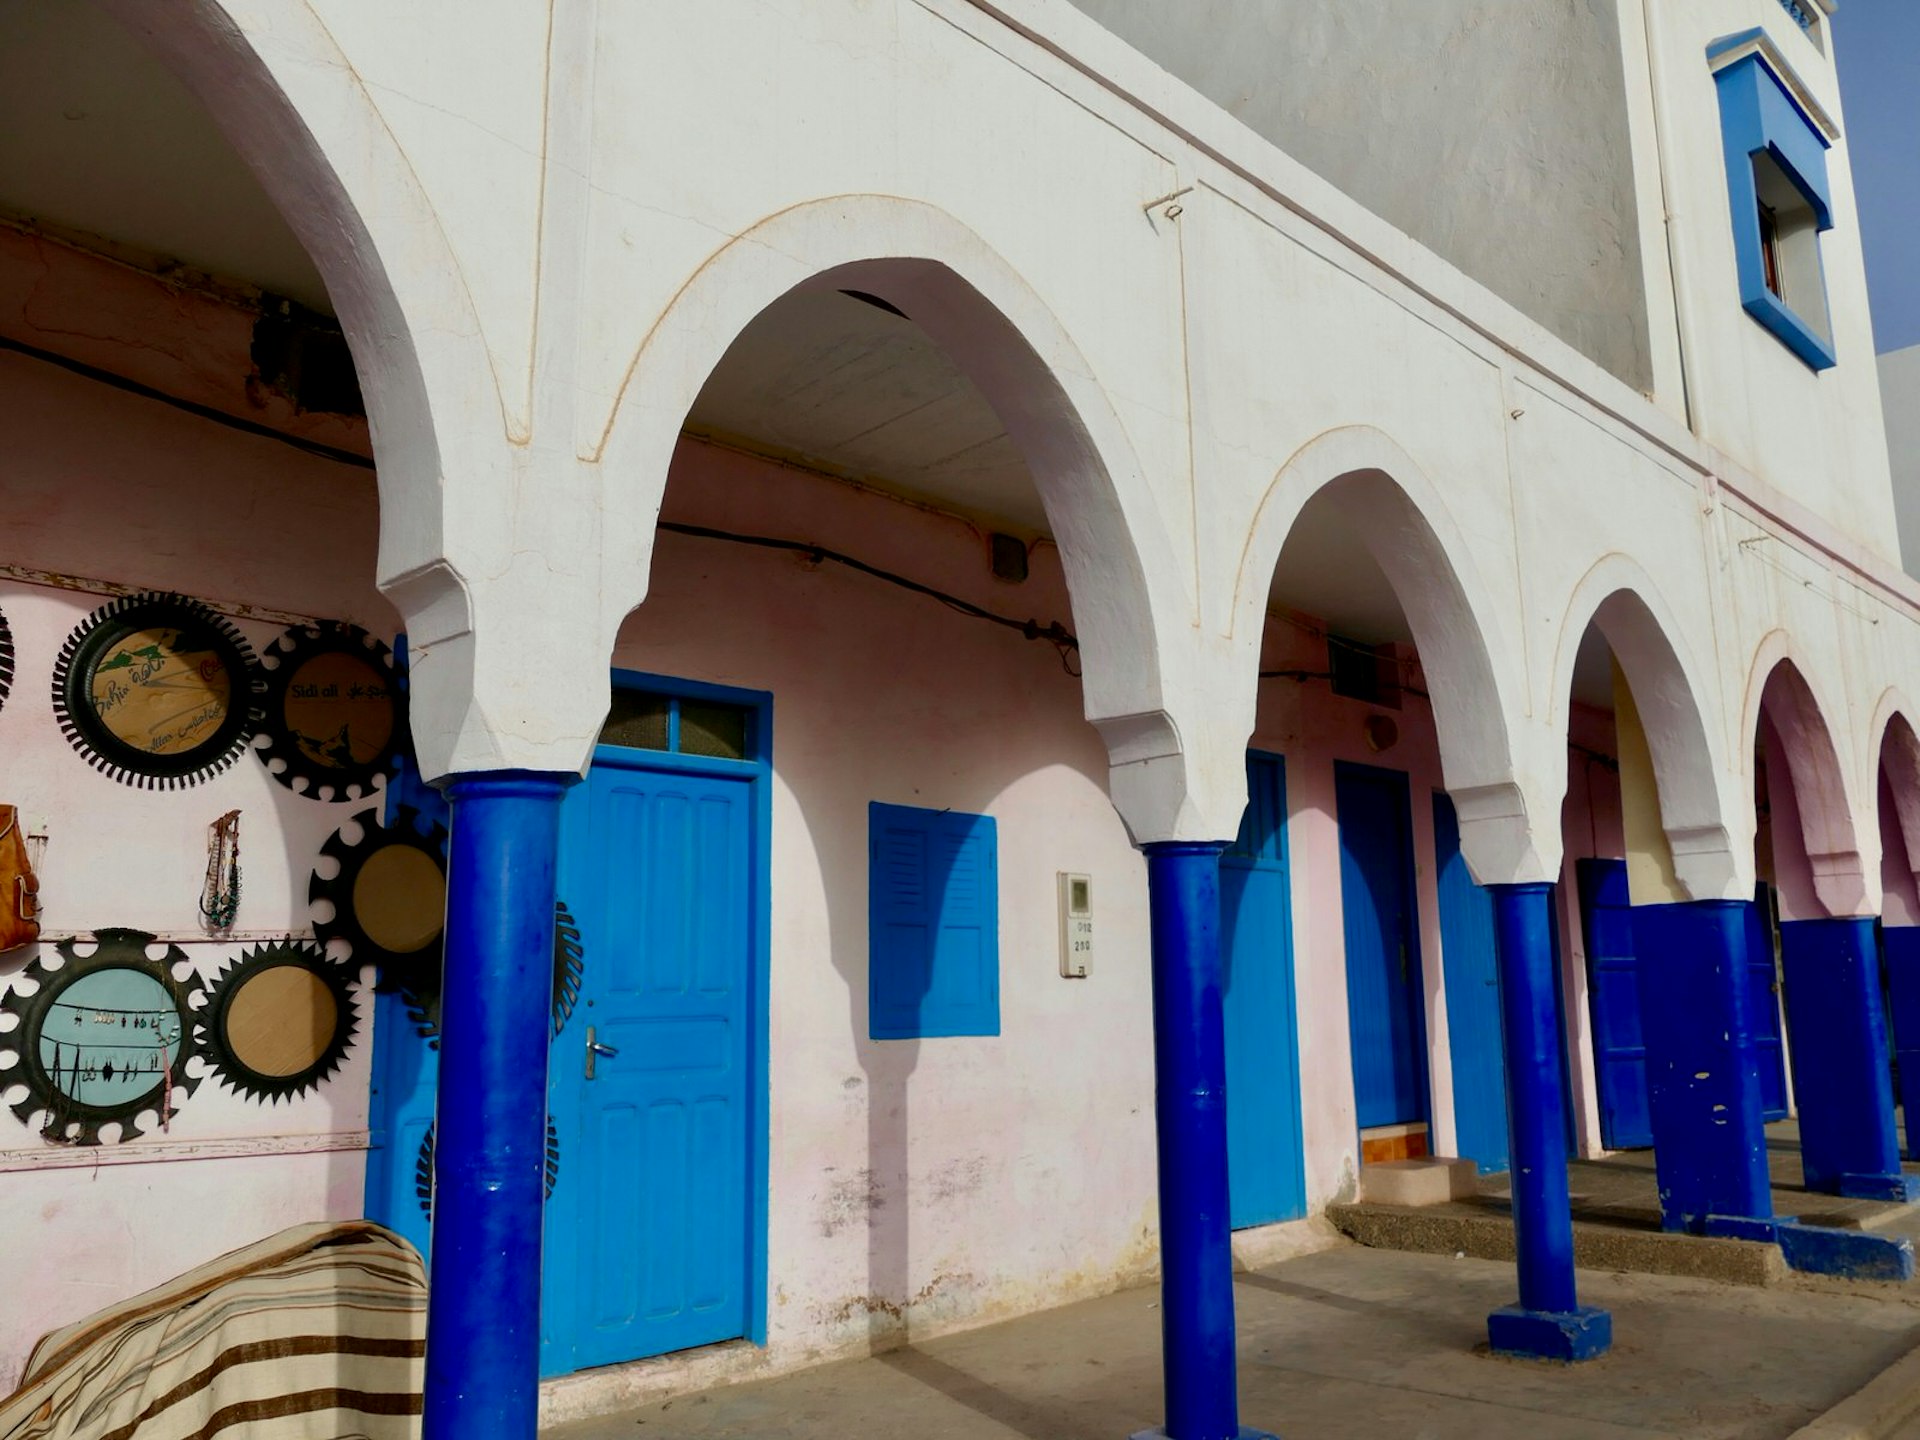 Blue and white arches along one of two main streets in Mirleft, Morocco